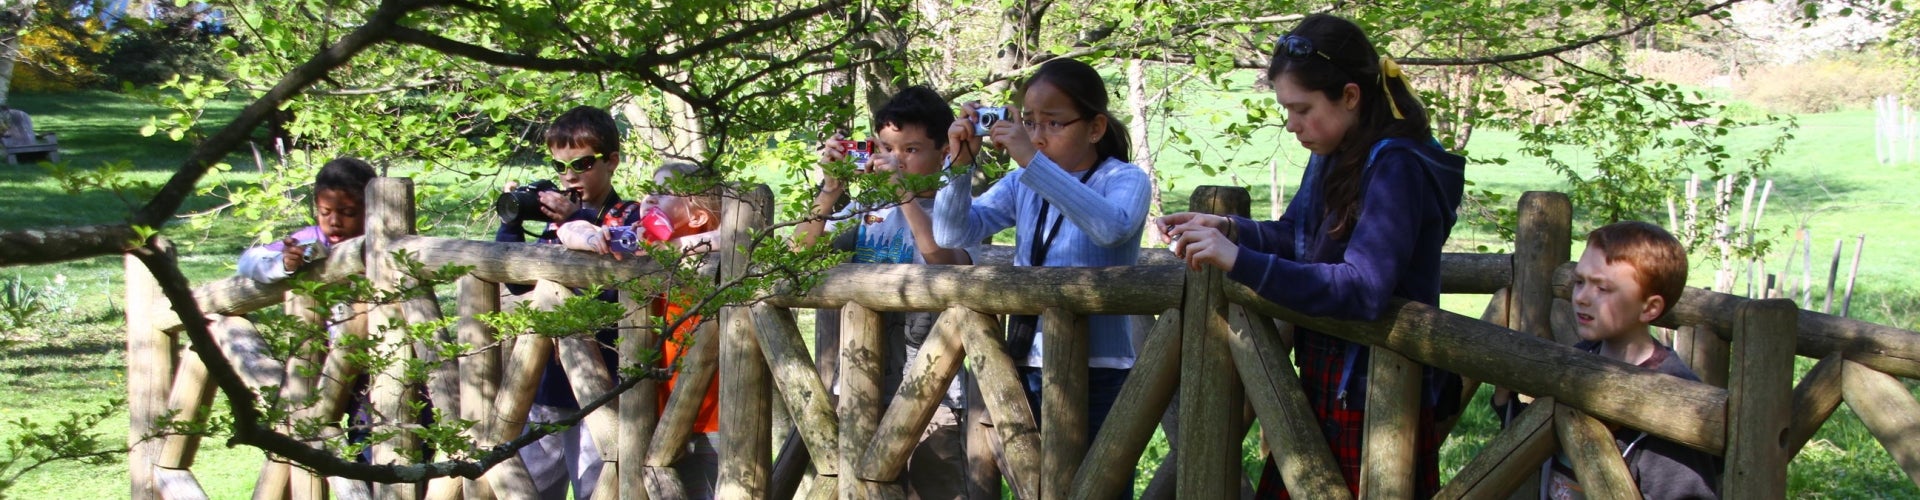 A group of children stand on a bridge and take photographs with cameras. 